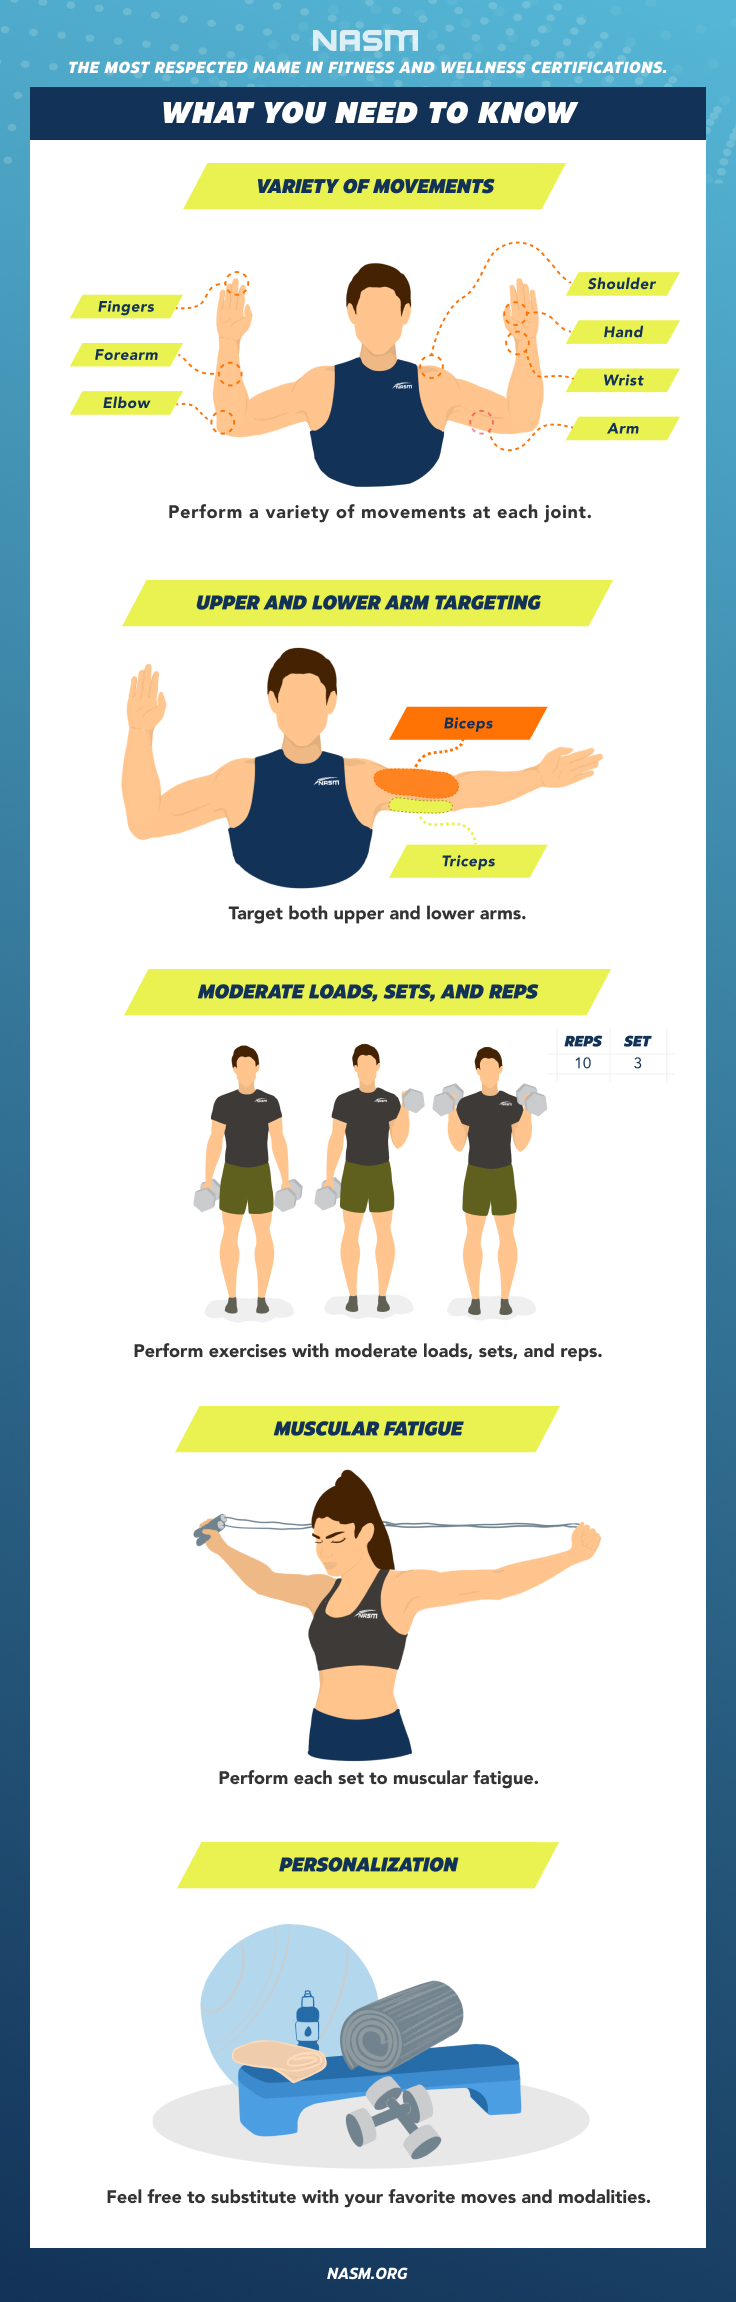 A Simple Dumbbell Arm Workout to Stay Toned & Strong